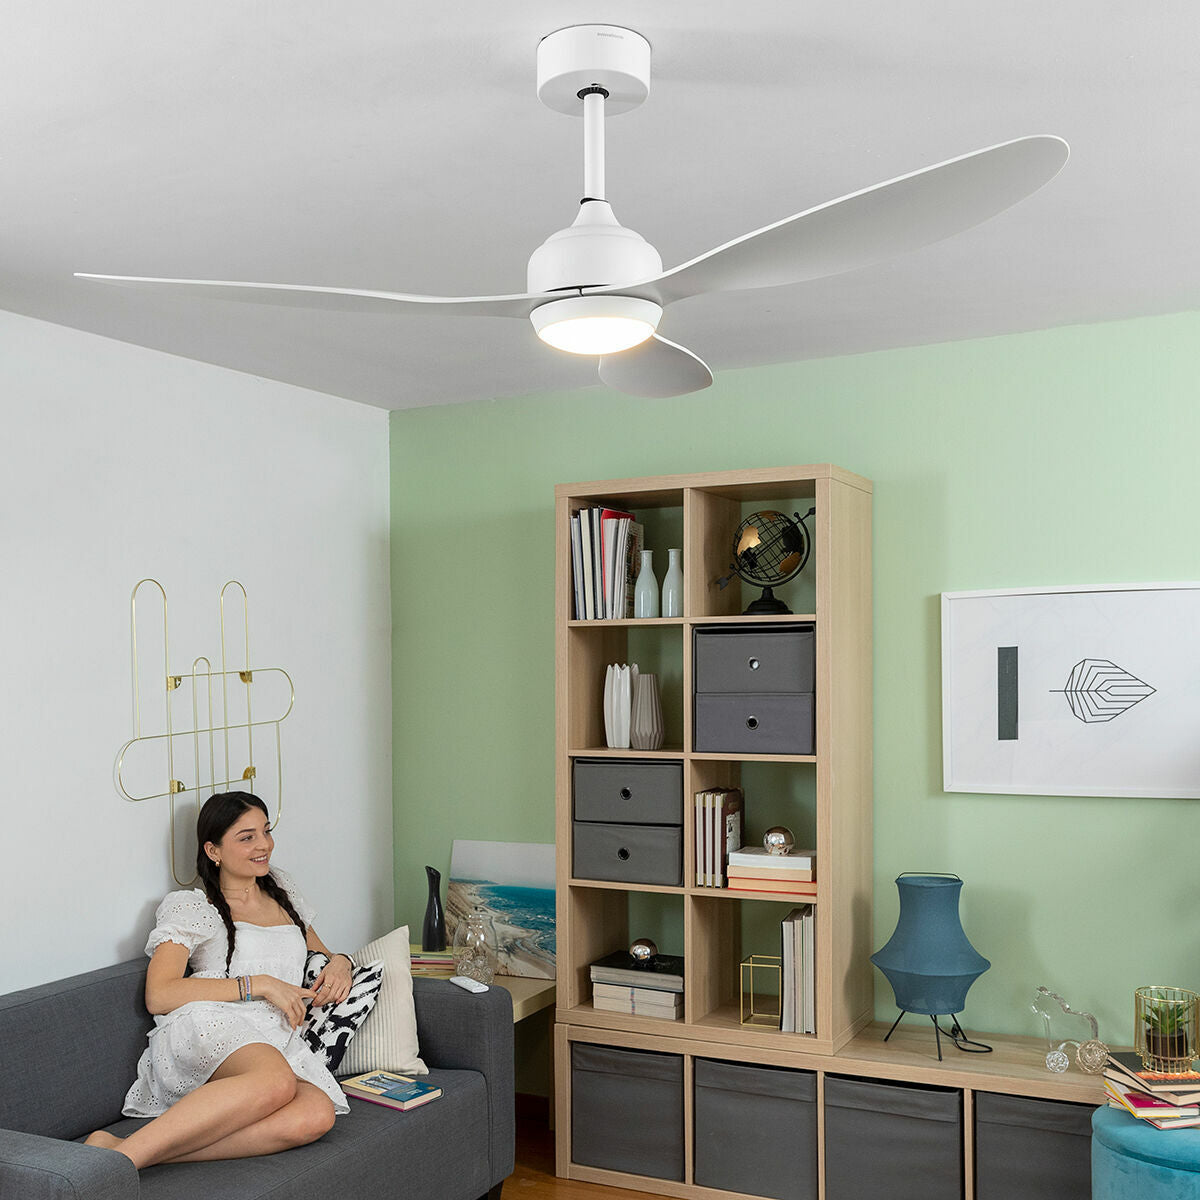 LED Ceiling Fan with 3 ABS Blades Flaled InnovaGoods White 36 W 52" Ø132 cm